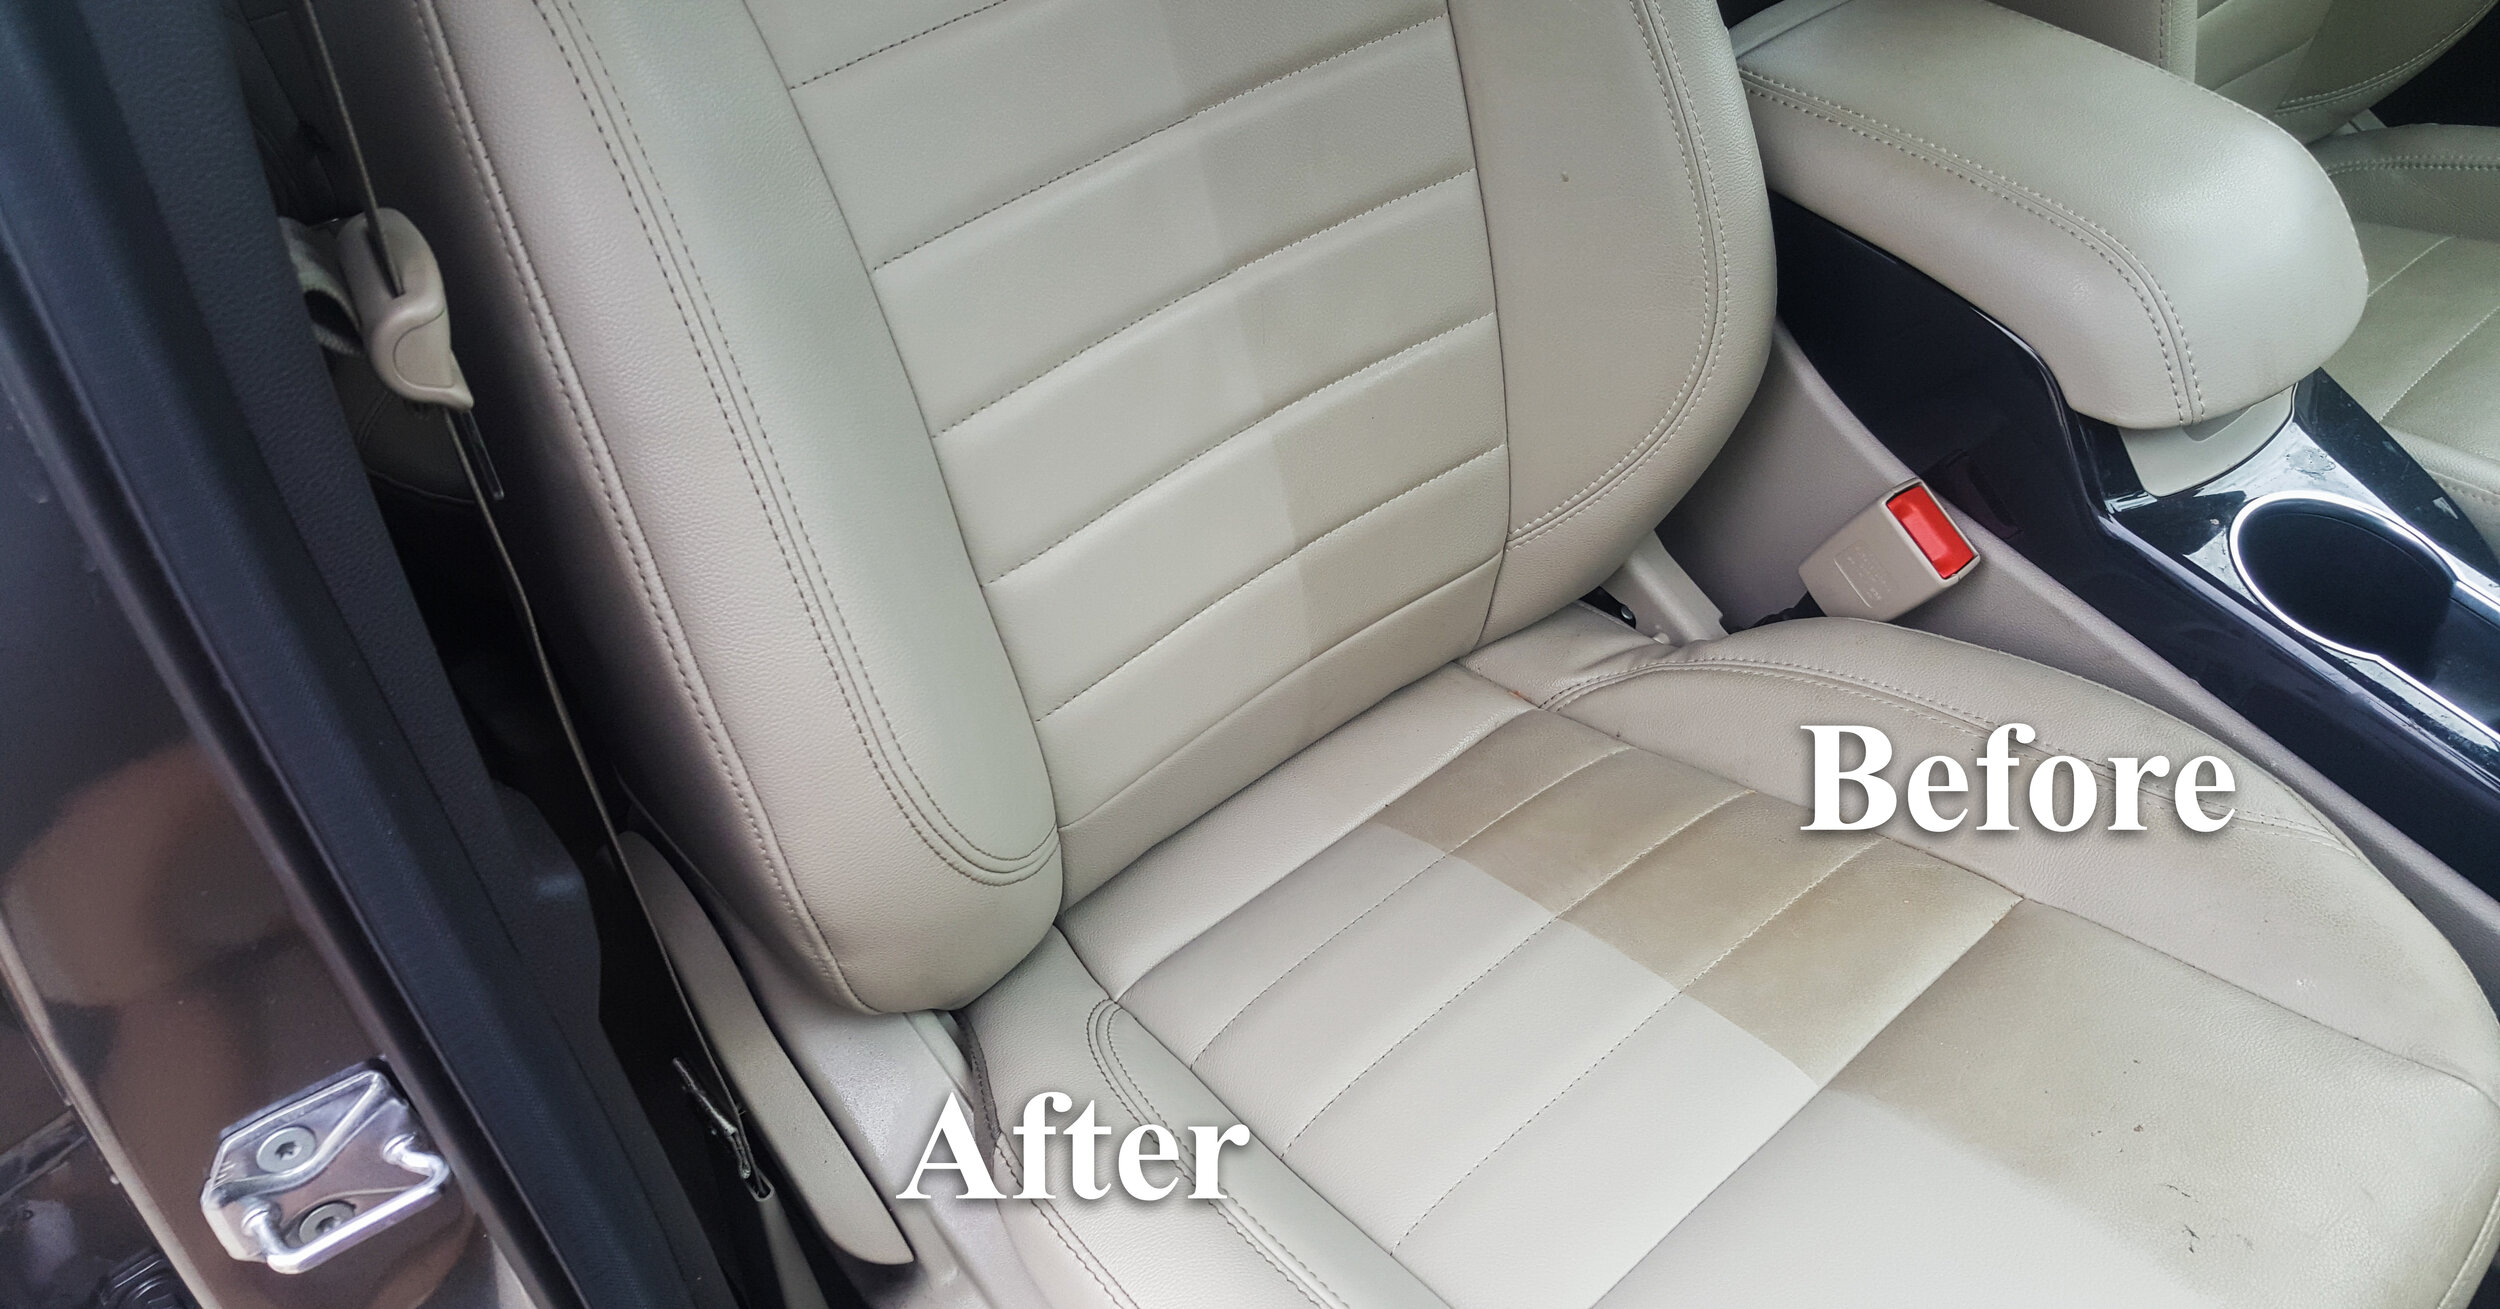 How To Clean Leather Car Seats At Home, What Do You Use To Clean Leather Car Seats